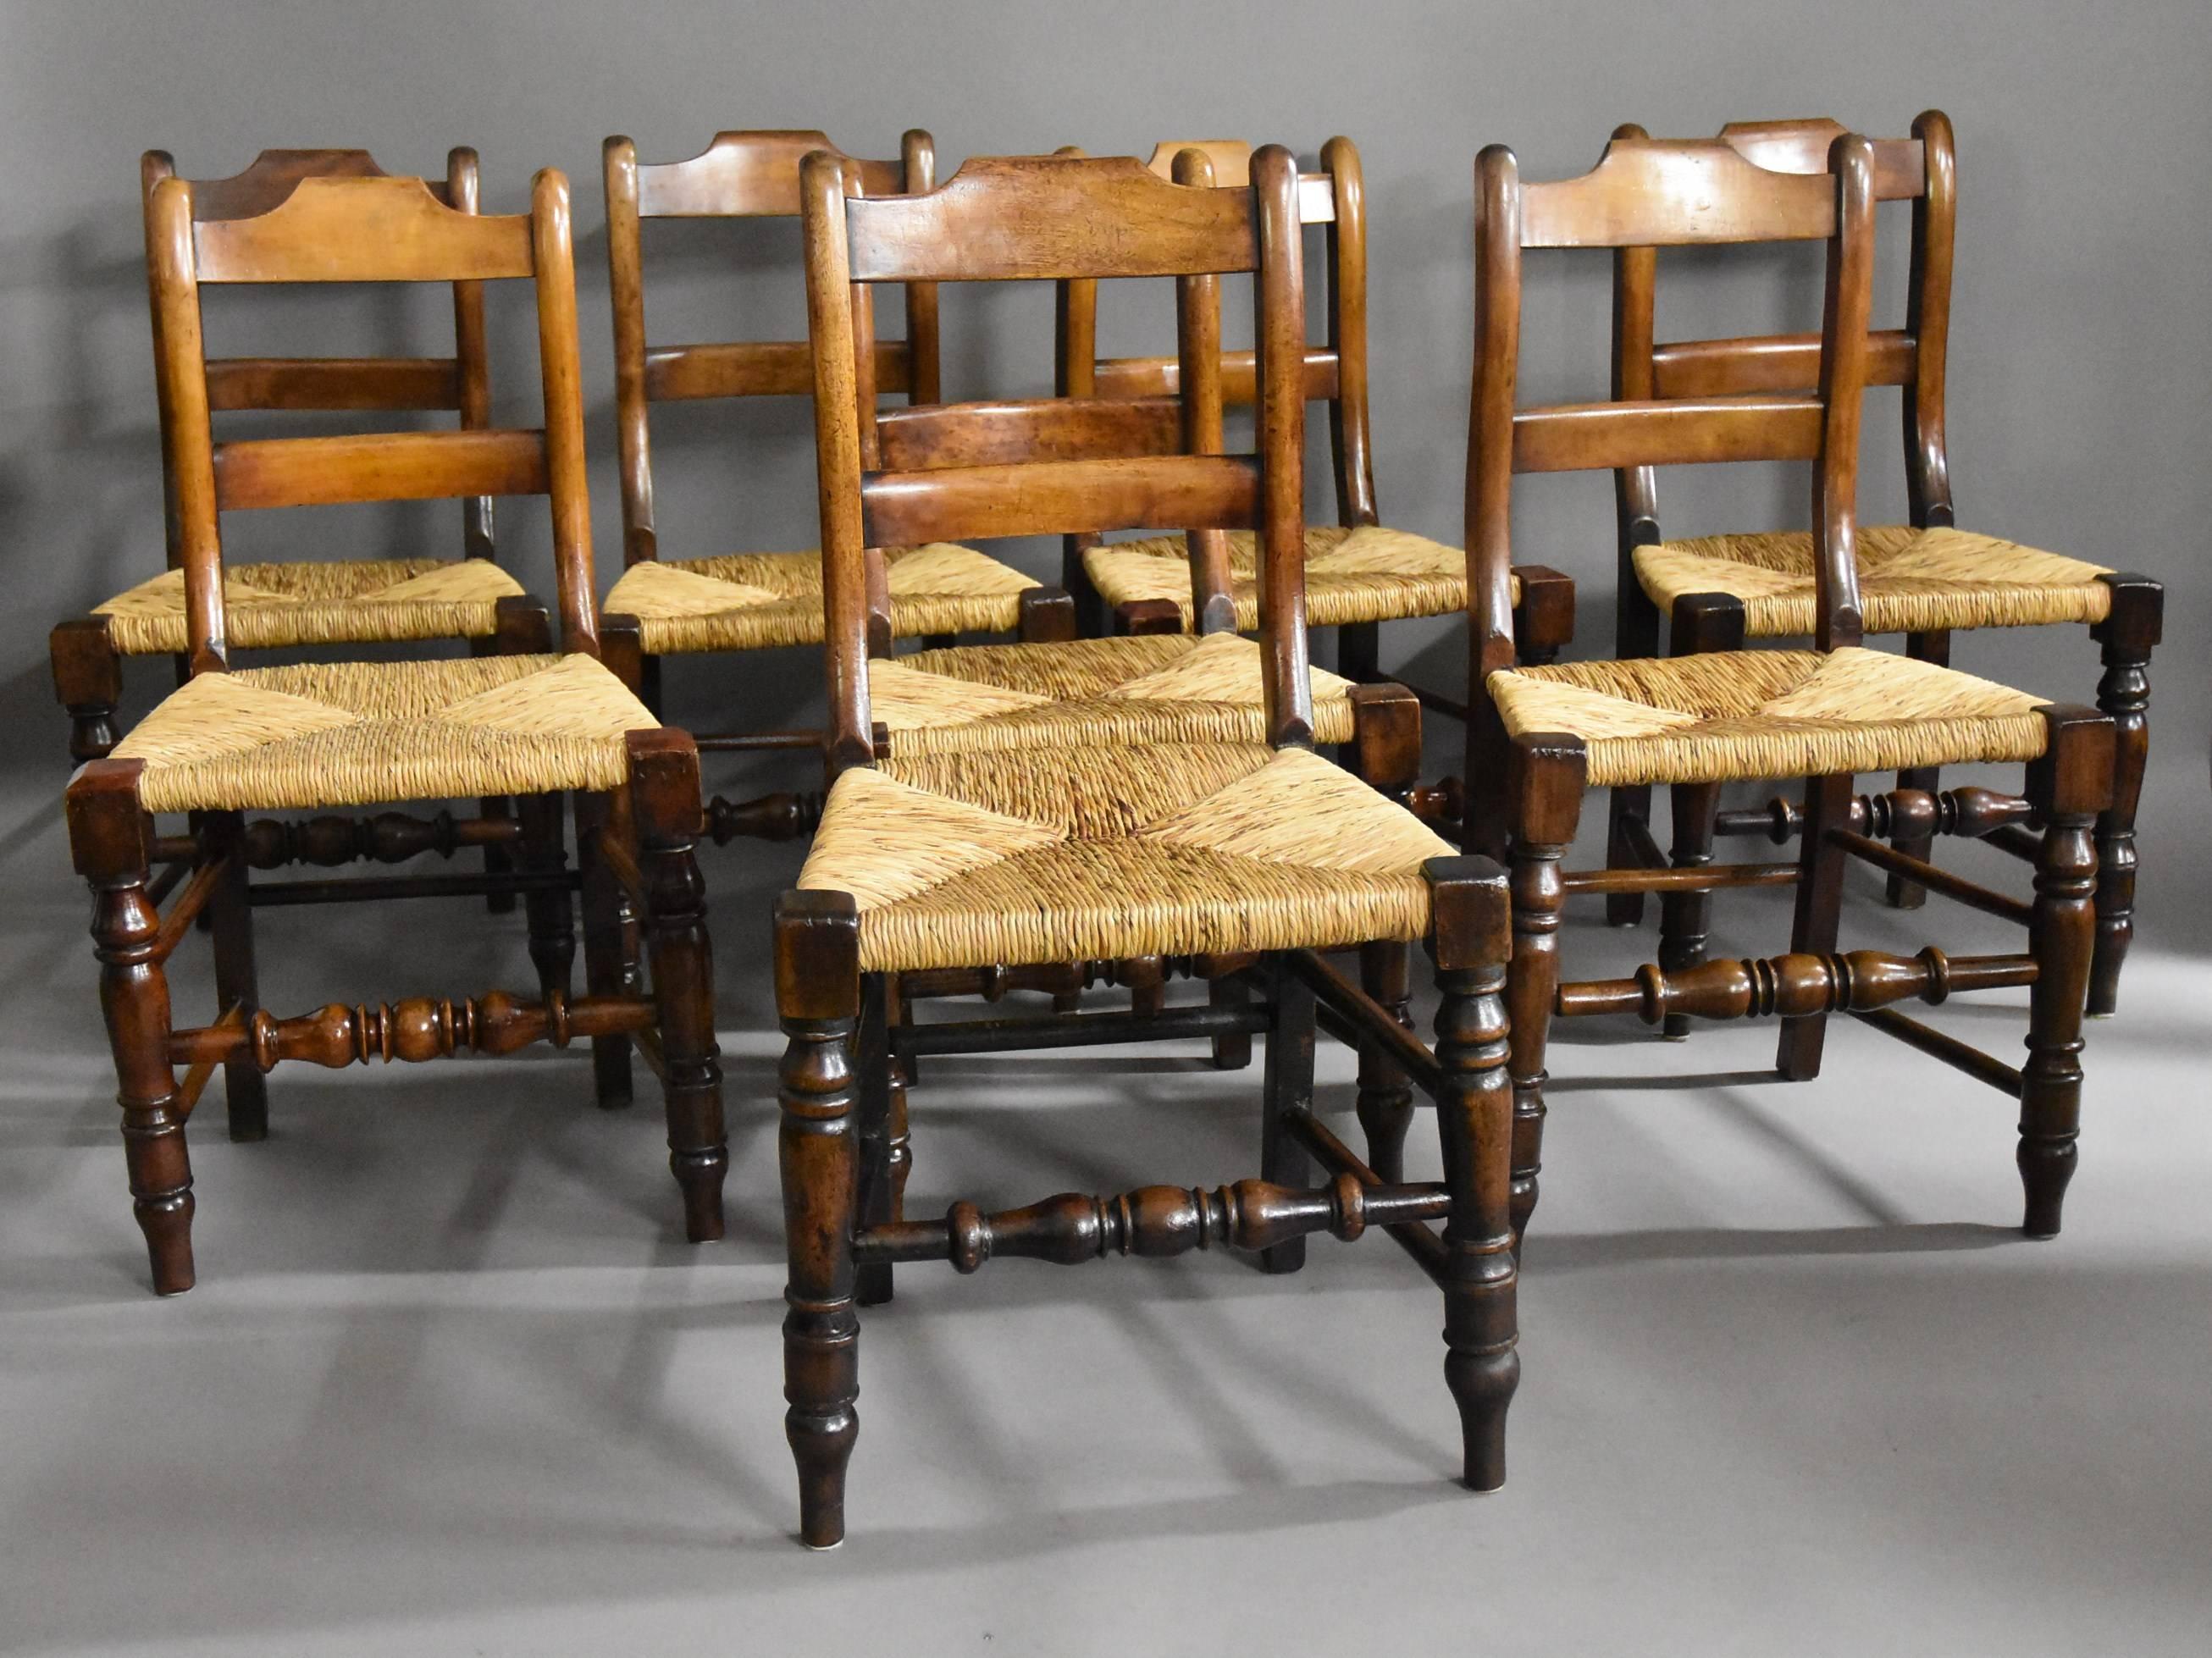 A mid-late 19th century set of eight alder dining chairs (or kitchen chairs) of good patina (colour) from the Lancashire area.

Each of the chairs consist of a shaped top rail with a straight back splat and shaped uprights to each side leading